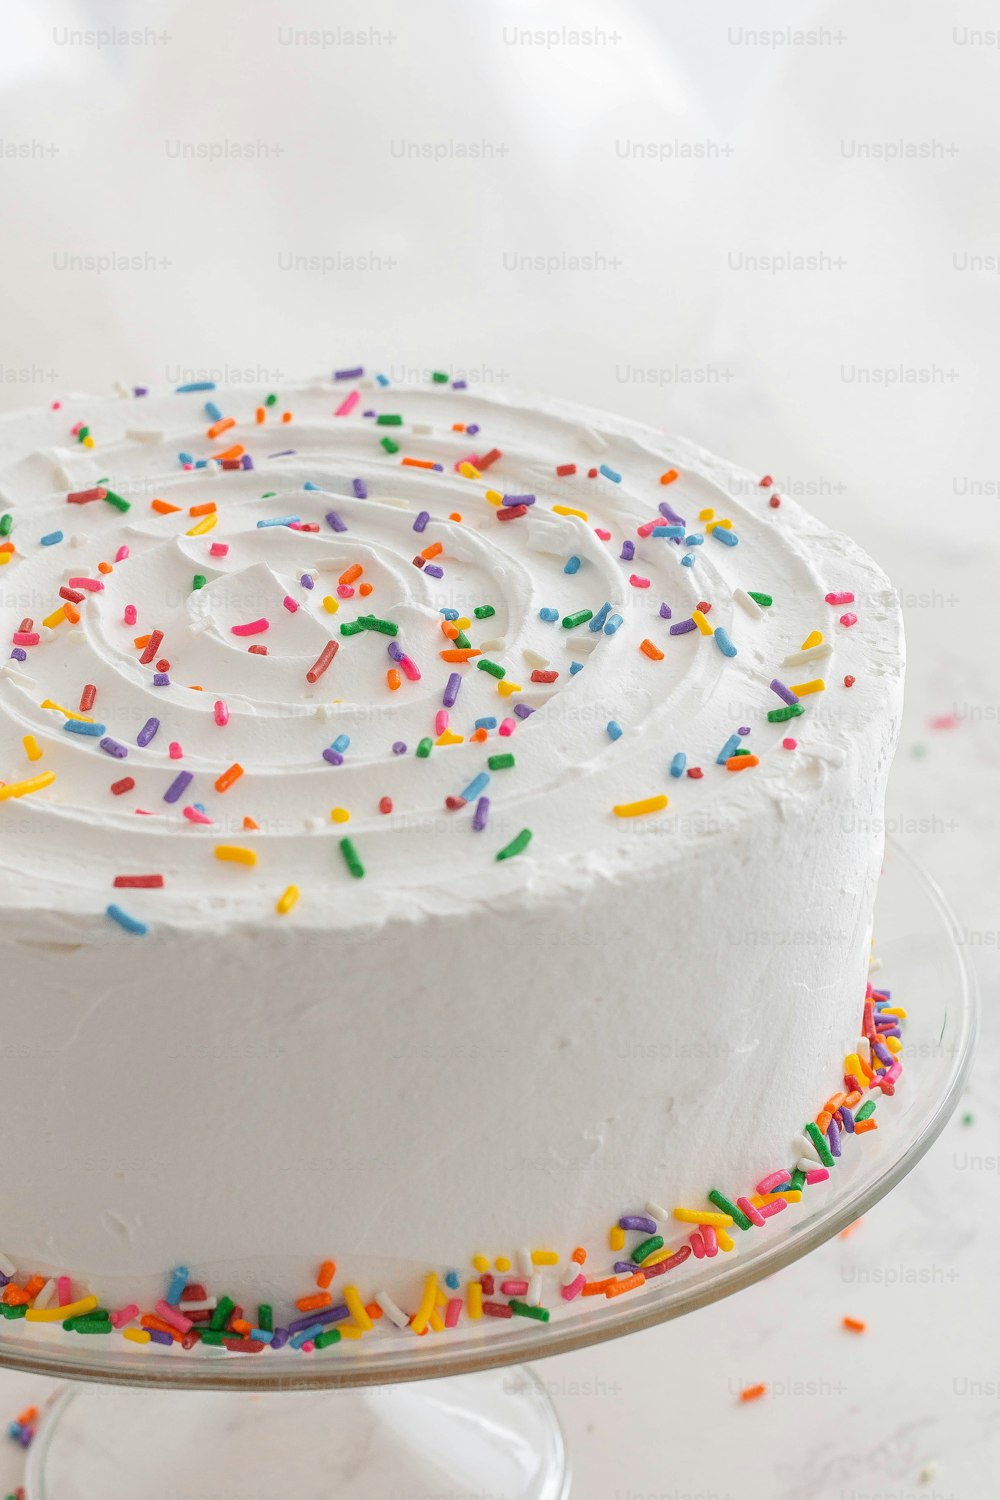 a cake with white frosting and sprinkles